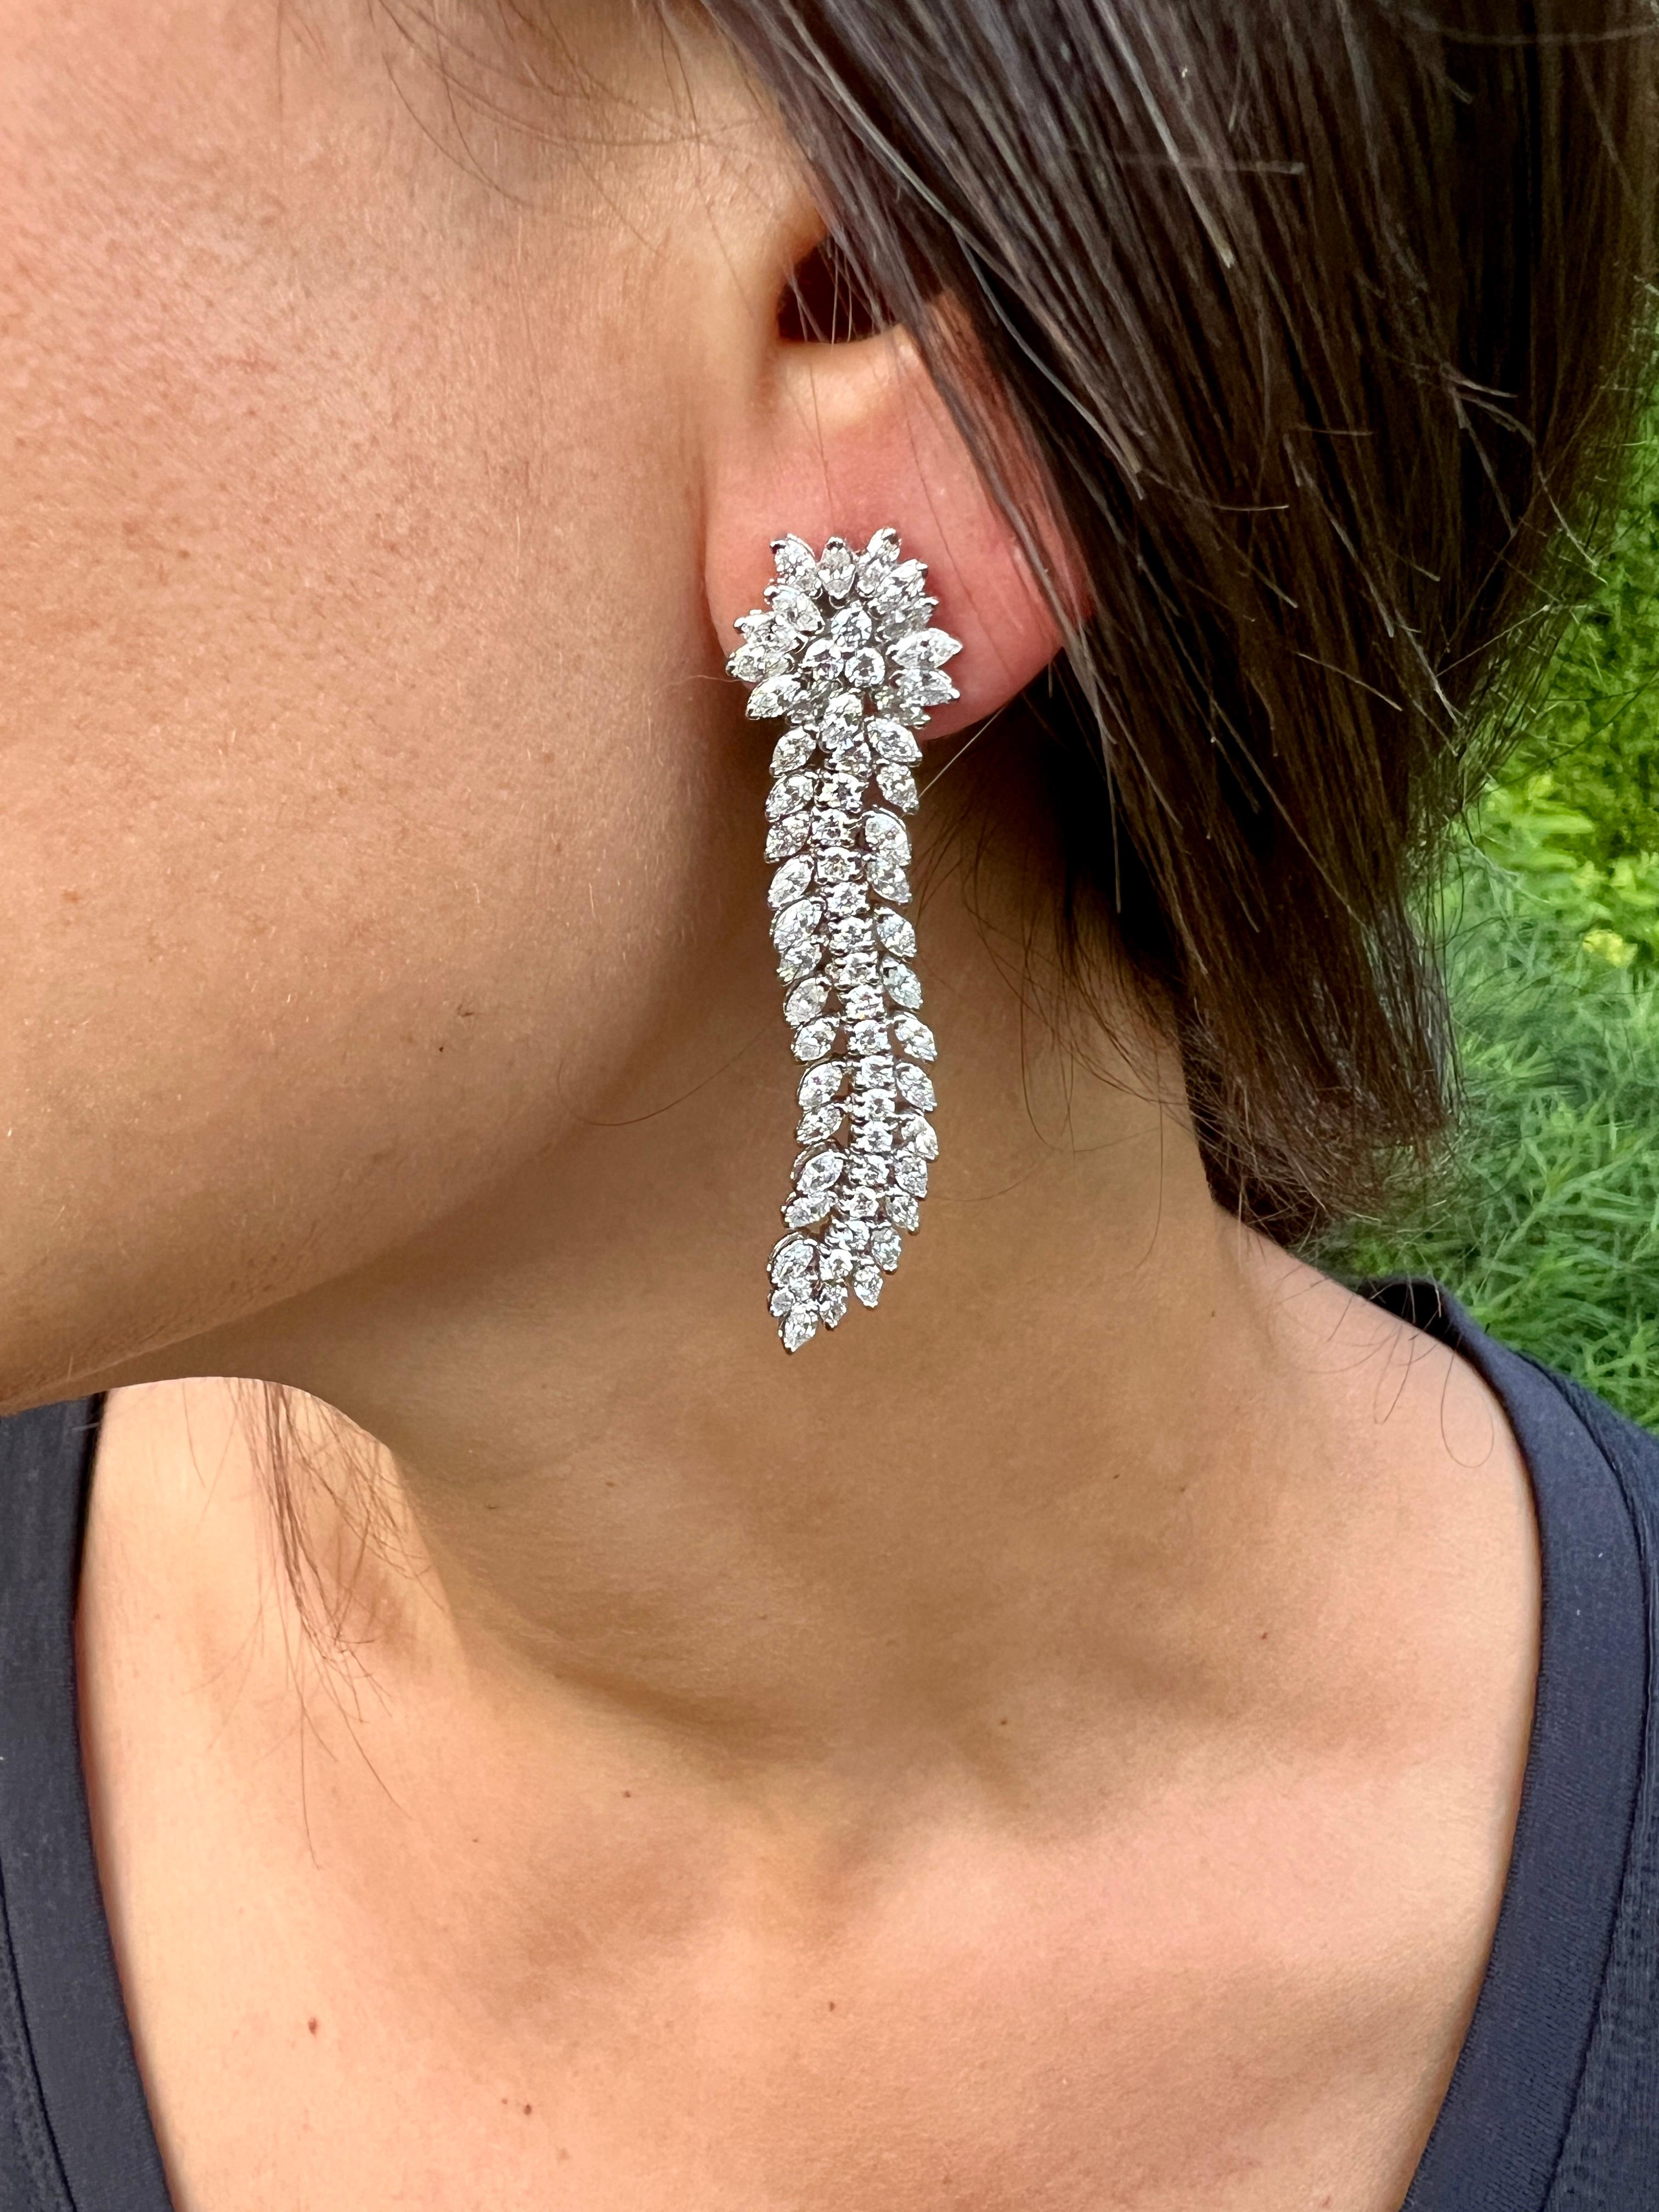 Looking for a pair of earrings that exude elegance and sophistication? Look no further than marquise and round diamond drop earrings! These stunning earrings are perfect for any occasion, whether you're dressing up for a formal event or adding a